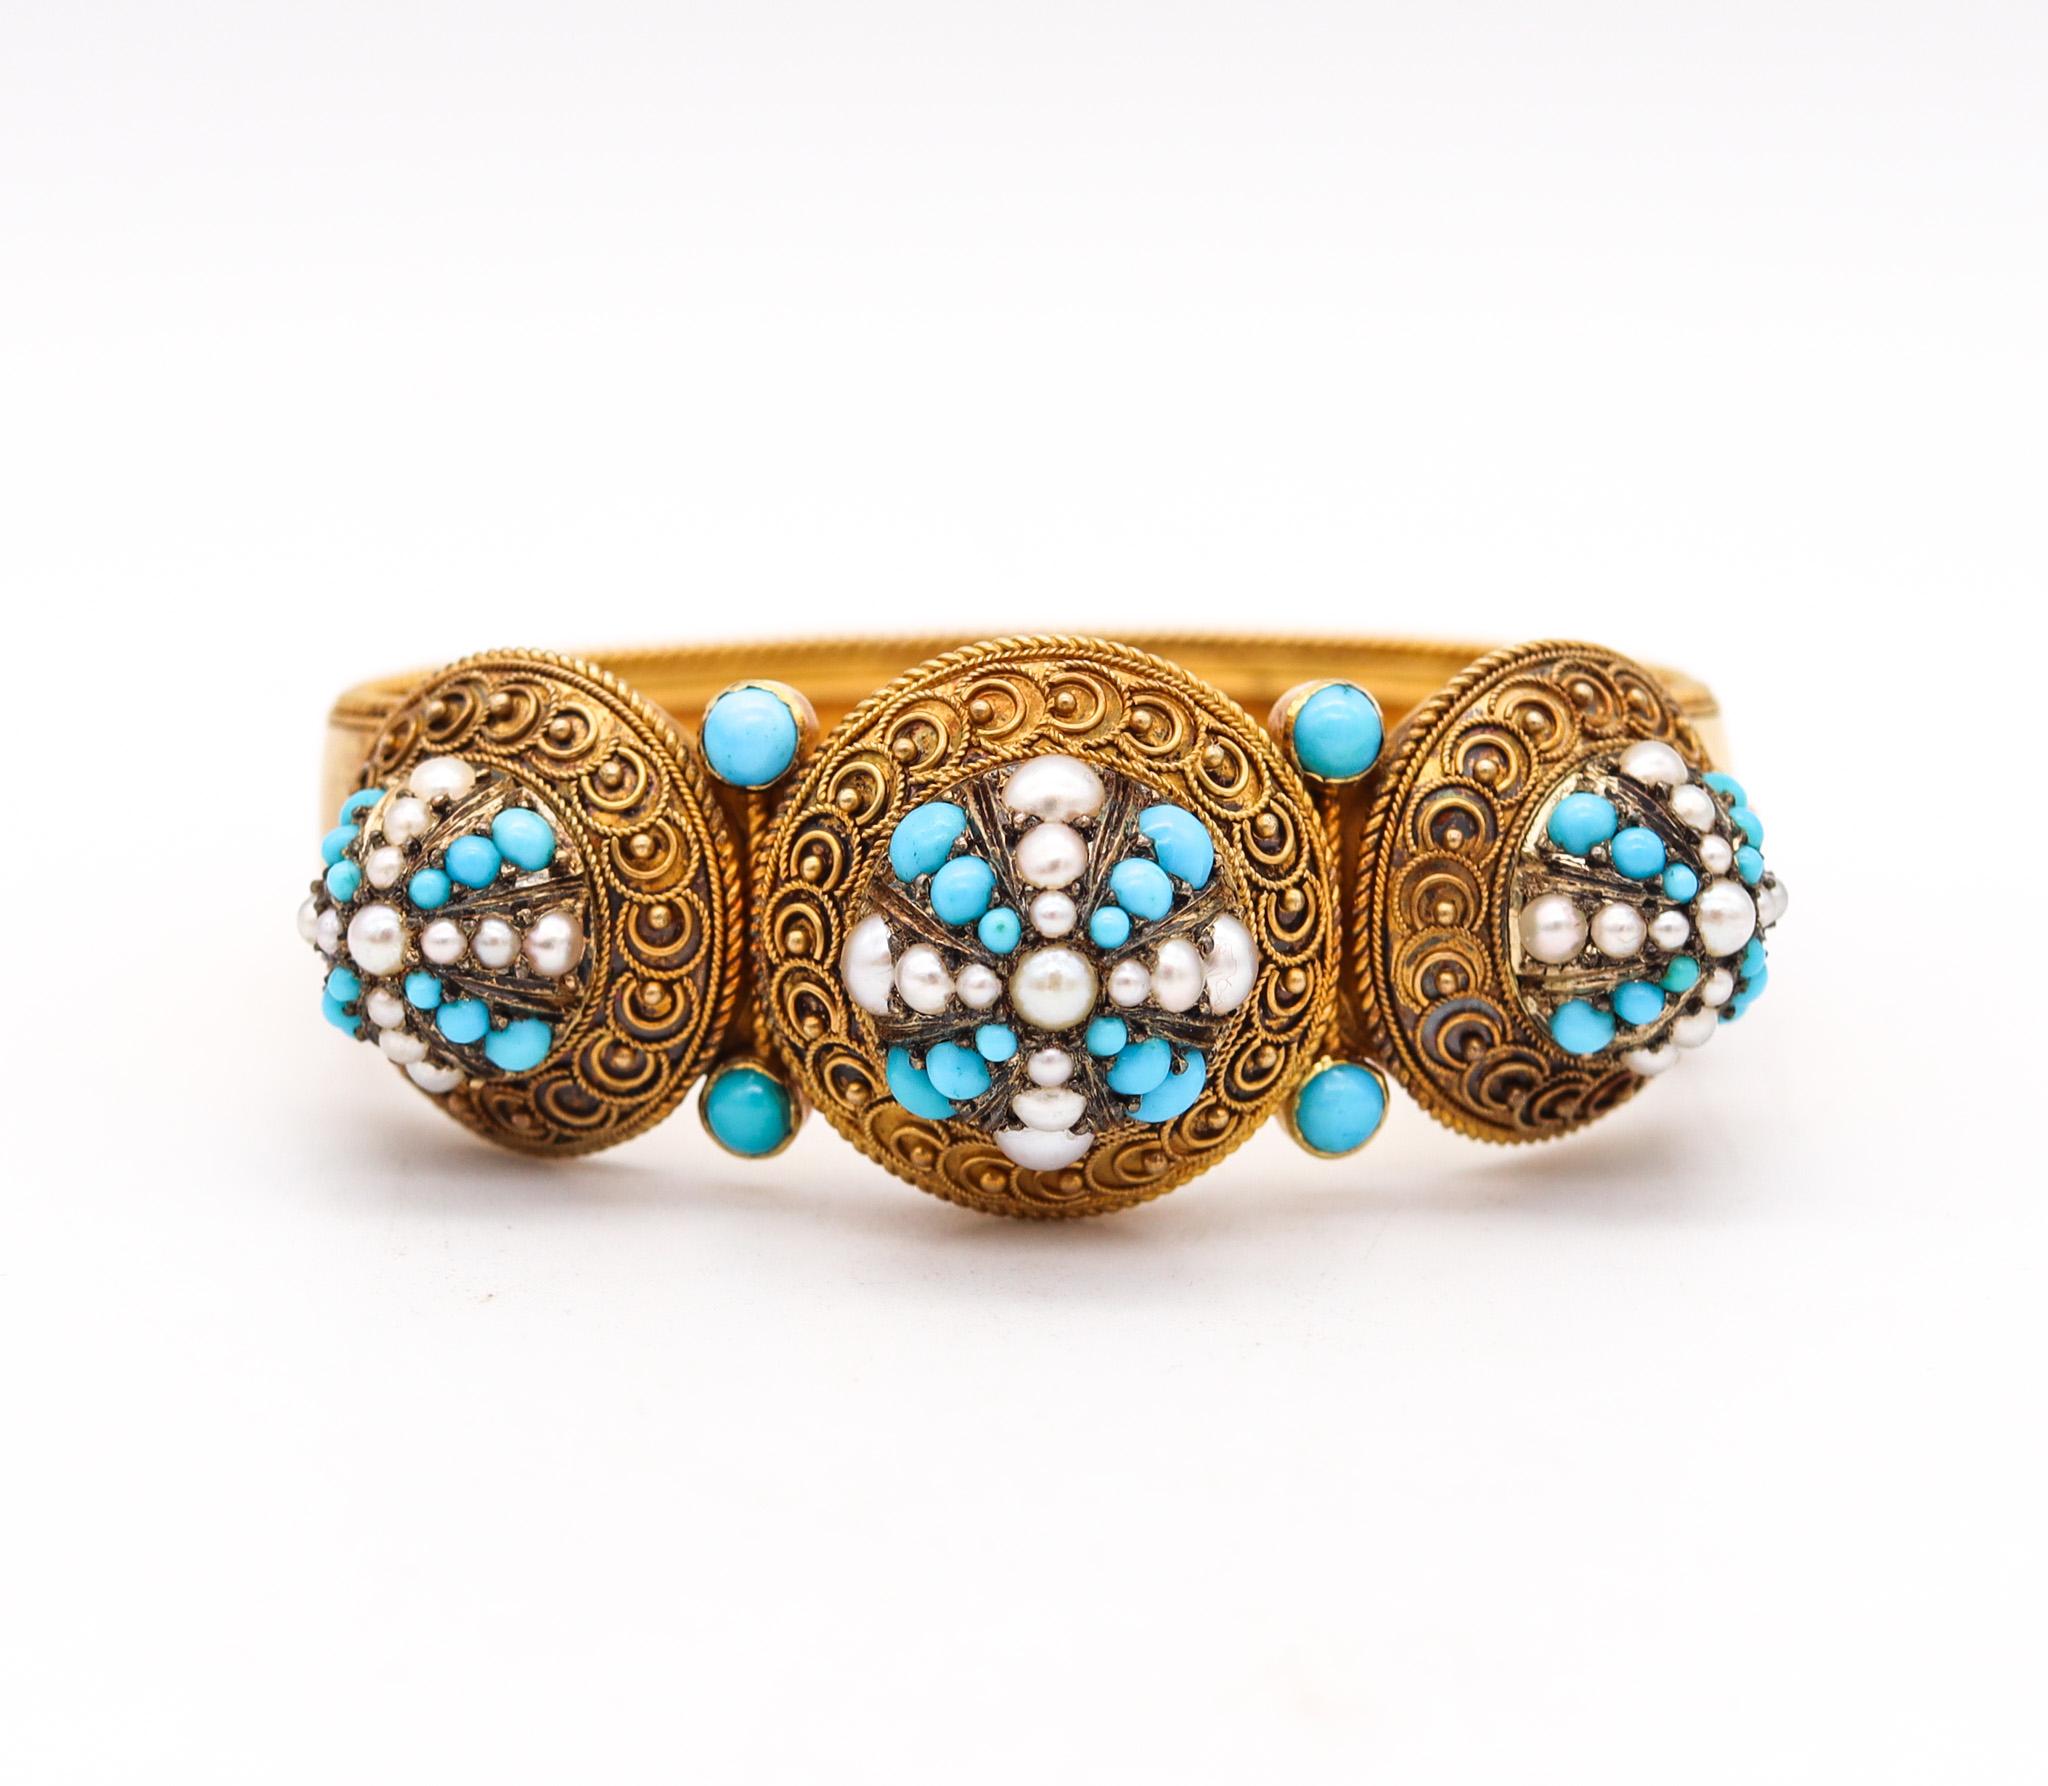 Exceptional Victorian Etruscan Revival bracelet.

Beautiful, rare and highly decorated piece, created in England during the Victorian Era (1837-1901), circa back in the 1880 This fabulous bangle bracelet has been carefully crafted in solid yellow